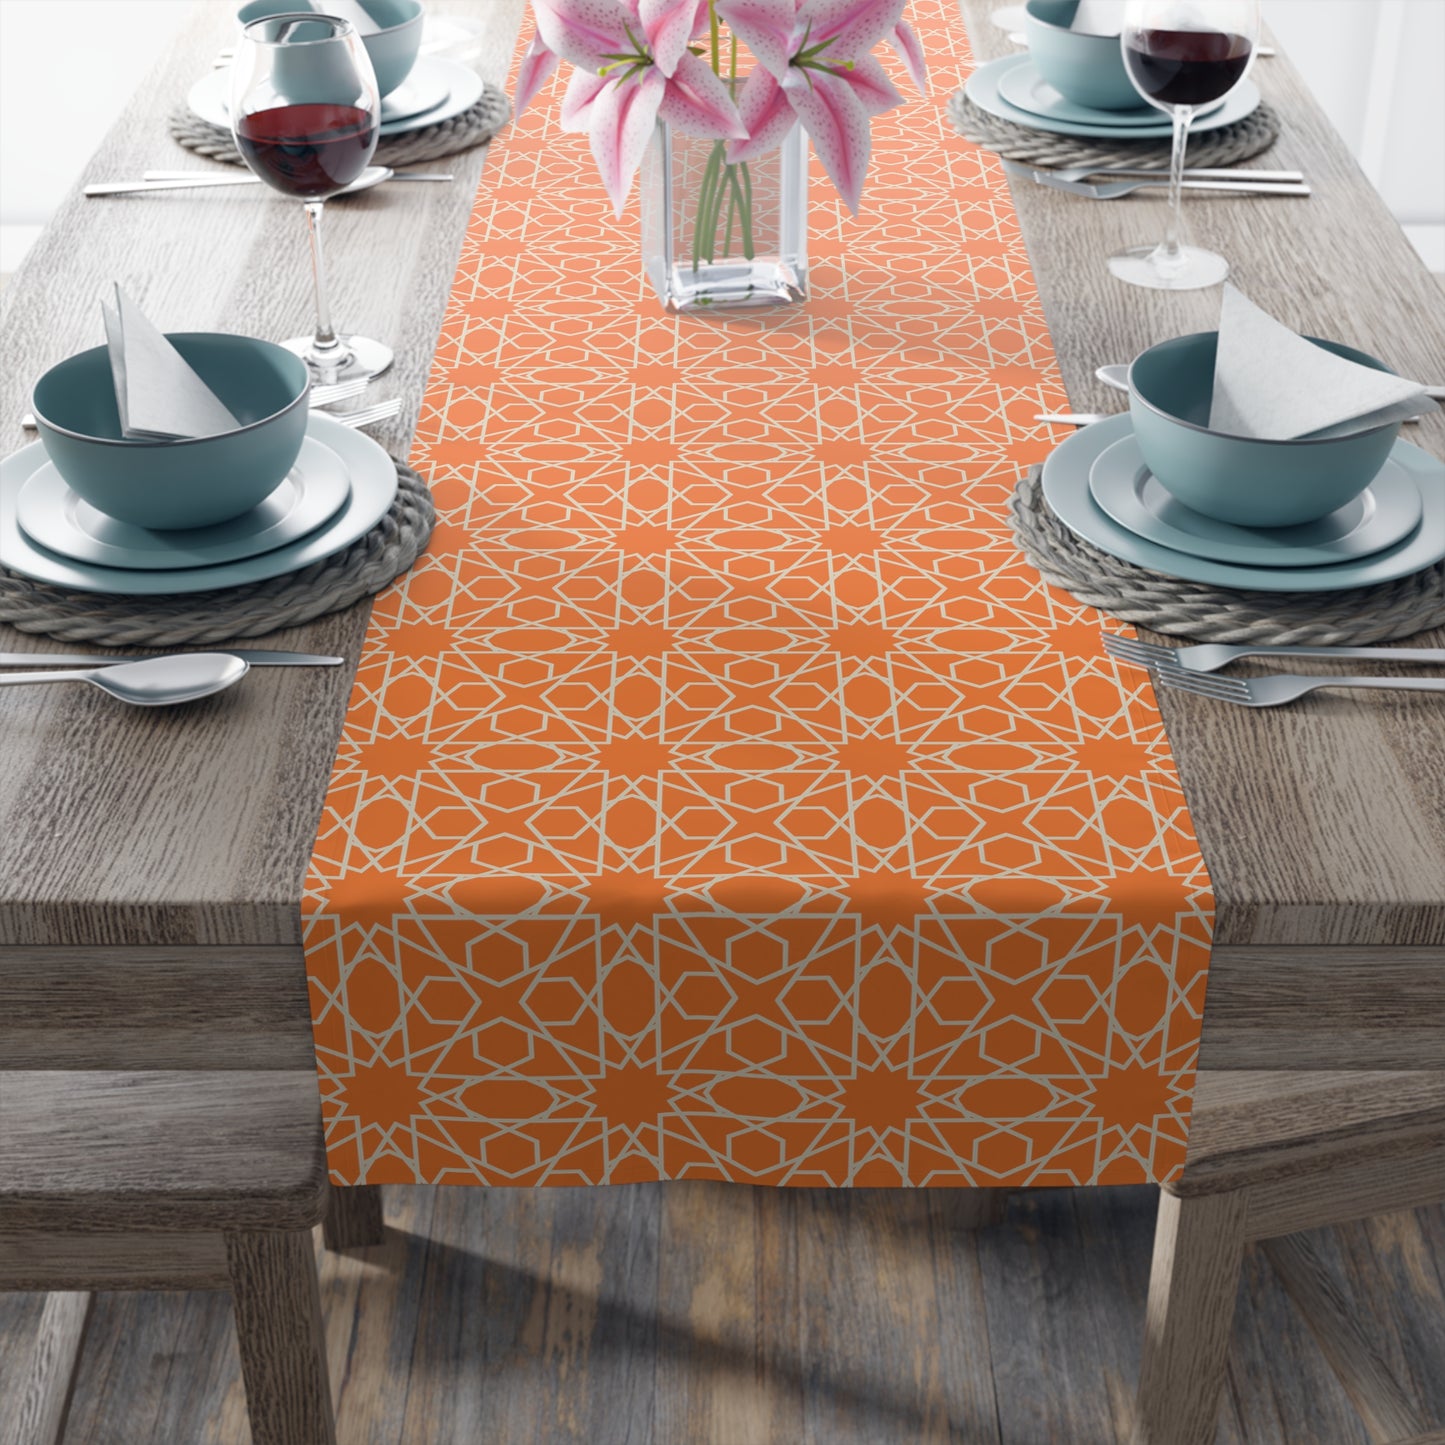 Copy of Table Runner (Cotton, Poly)